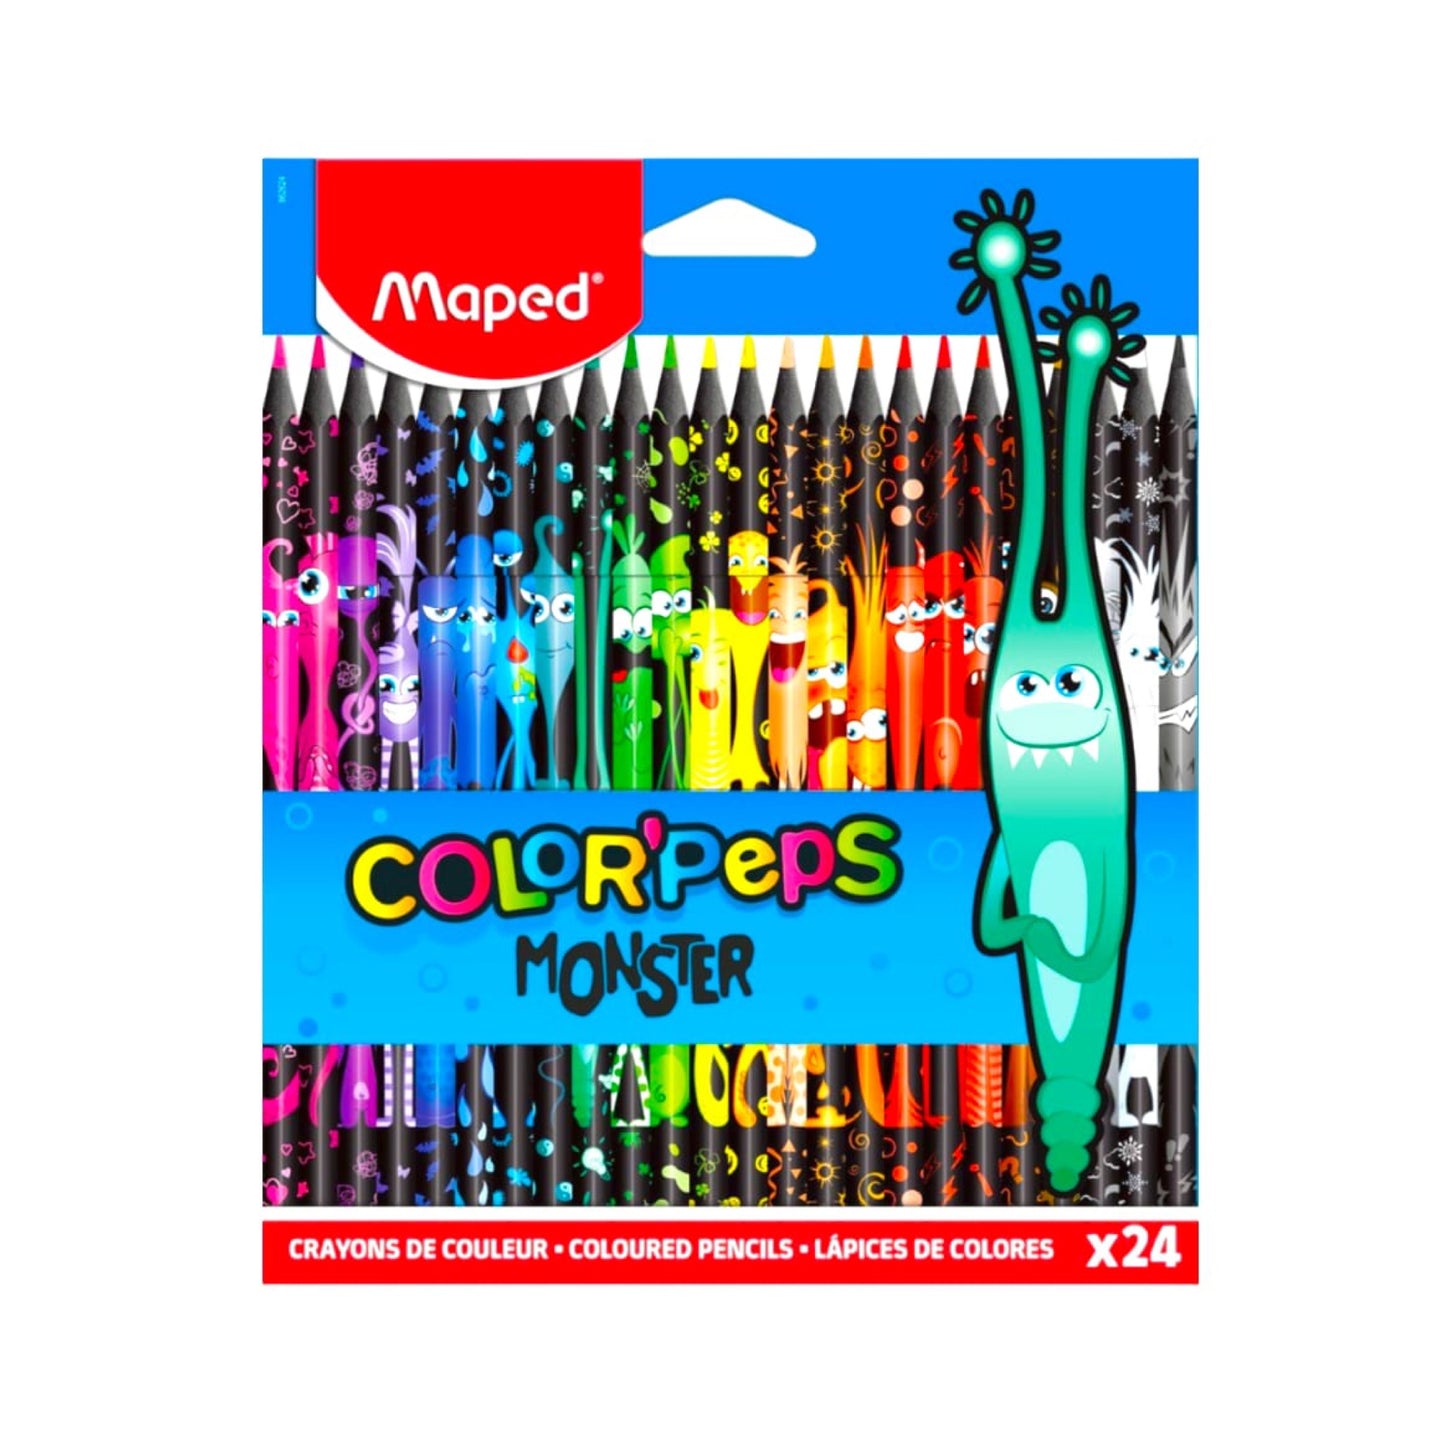 Maped Color Peps 24 Colored Pencils || الوان خشبية مابد ٢٤ لون